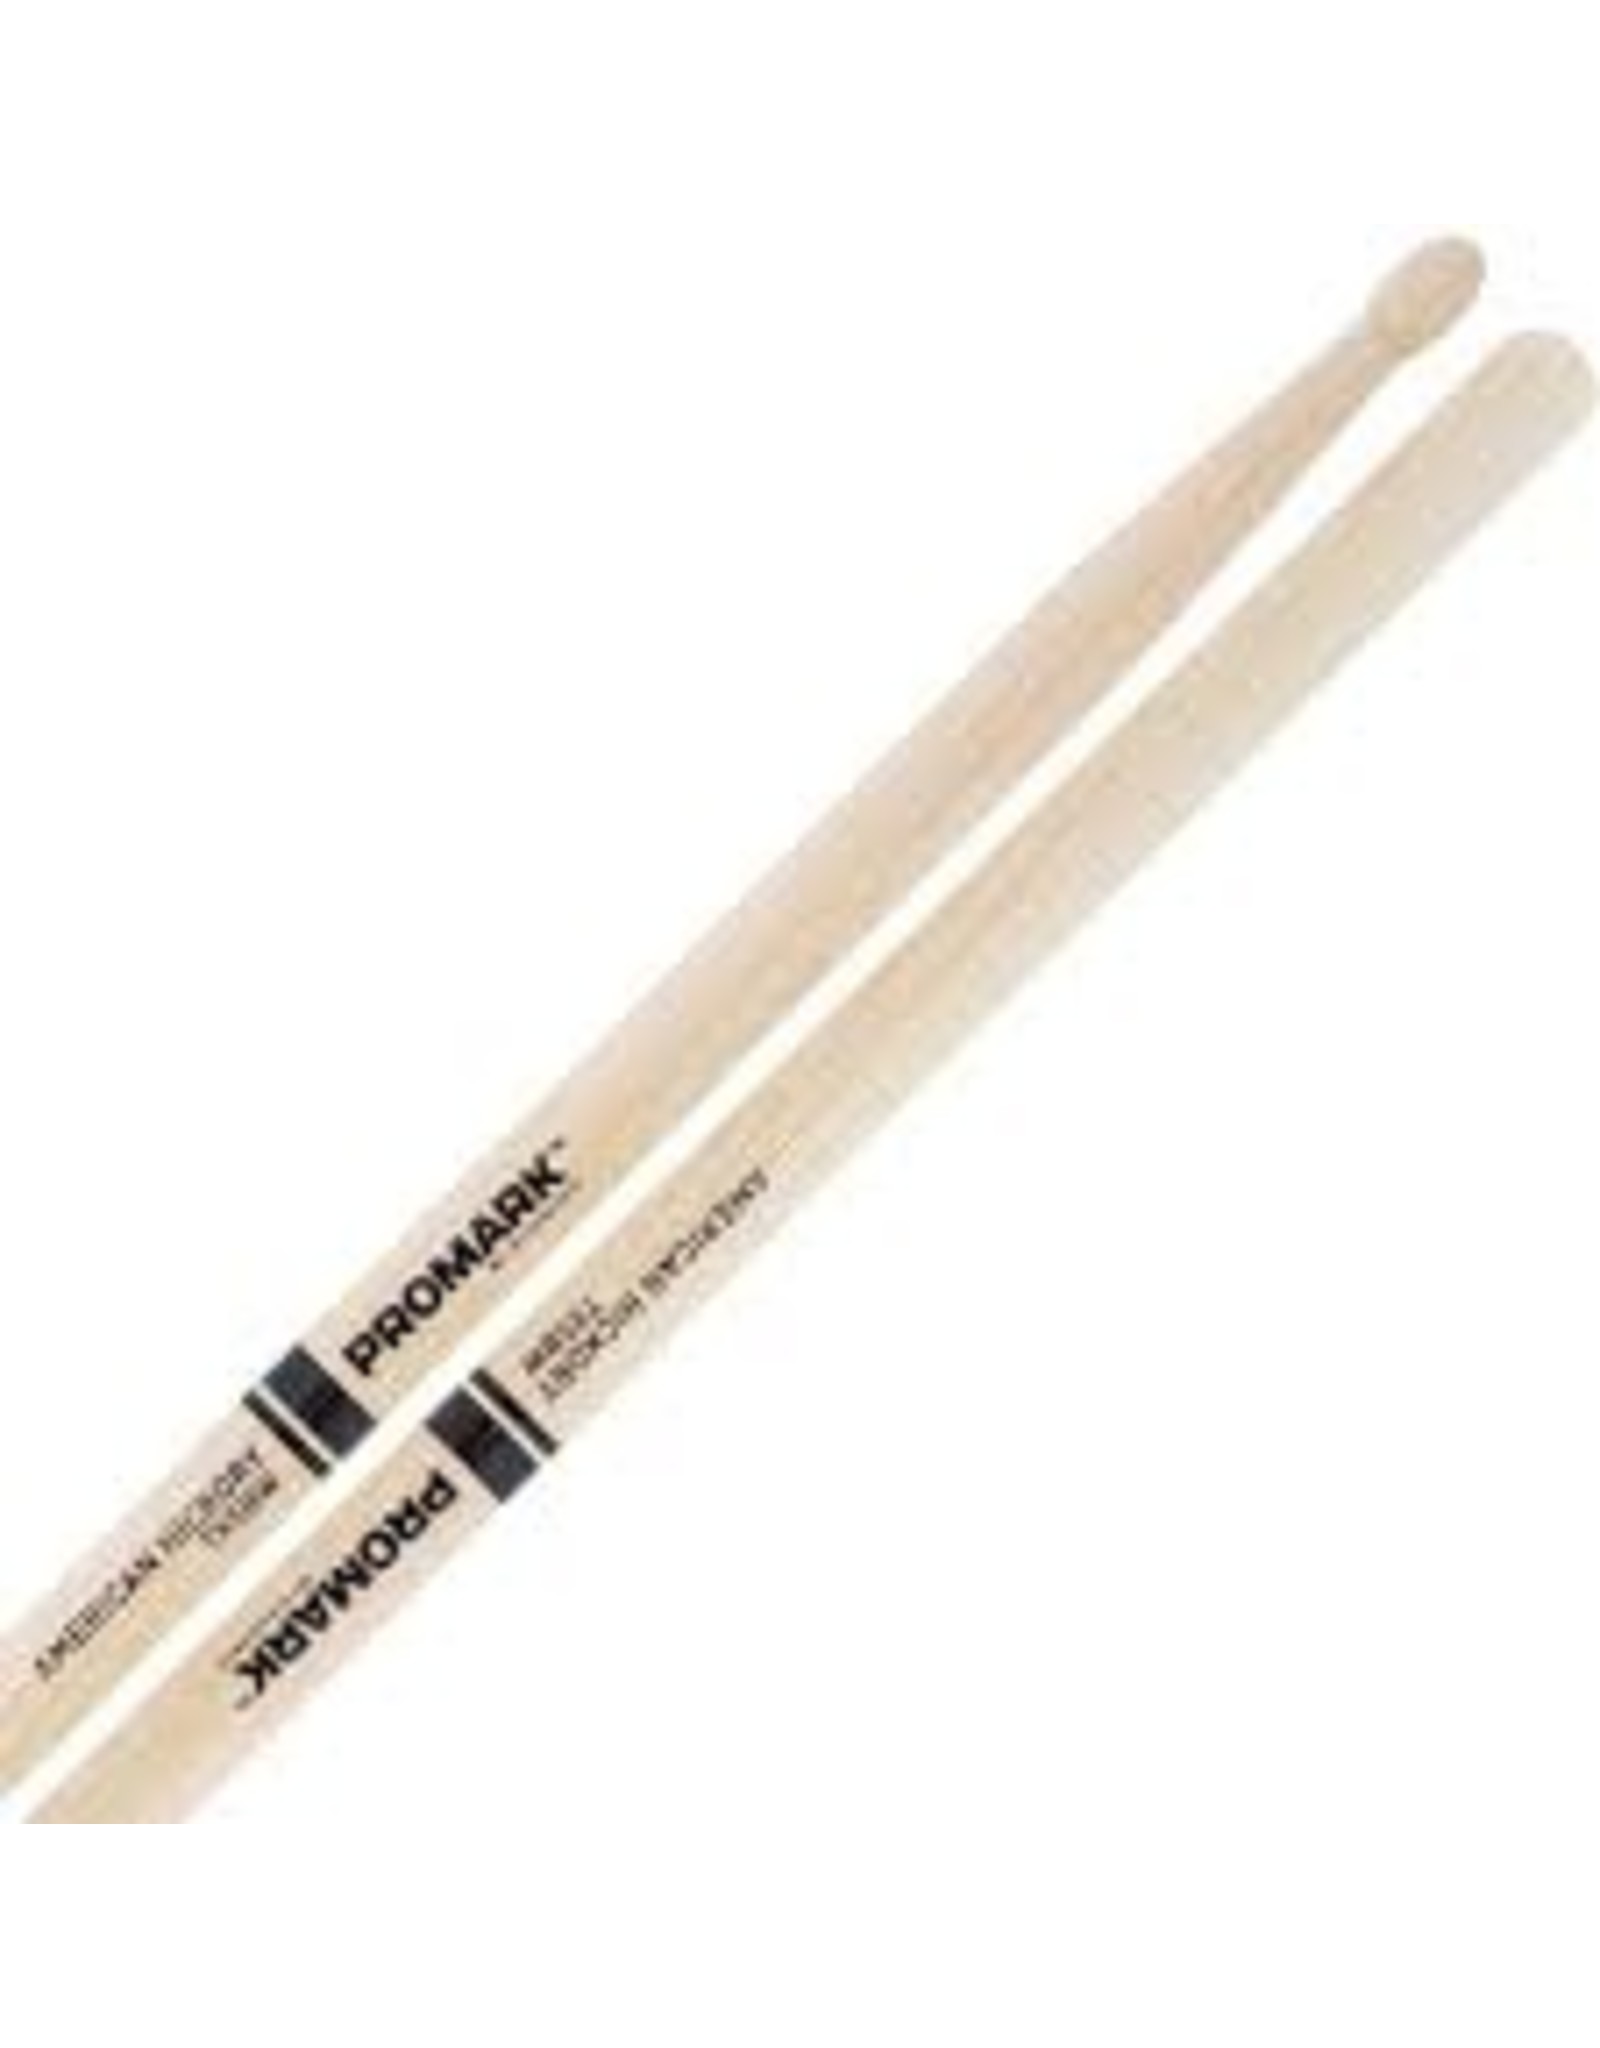 Promark ProMark Classic Forward 5B Hickory Drumstick, Oval Wood Tip